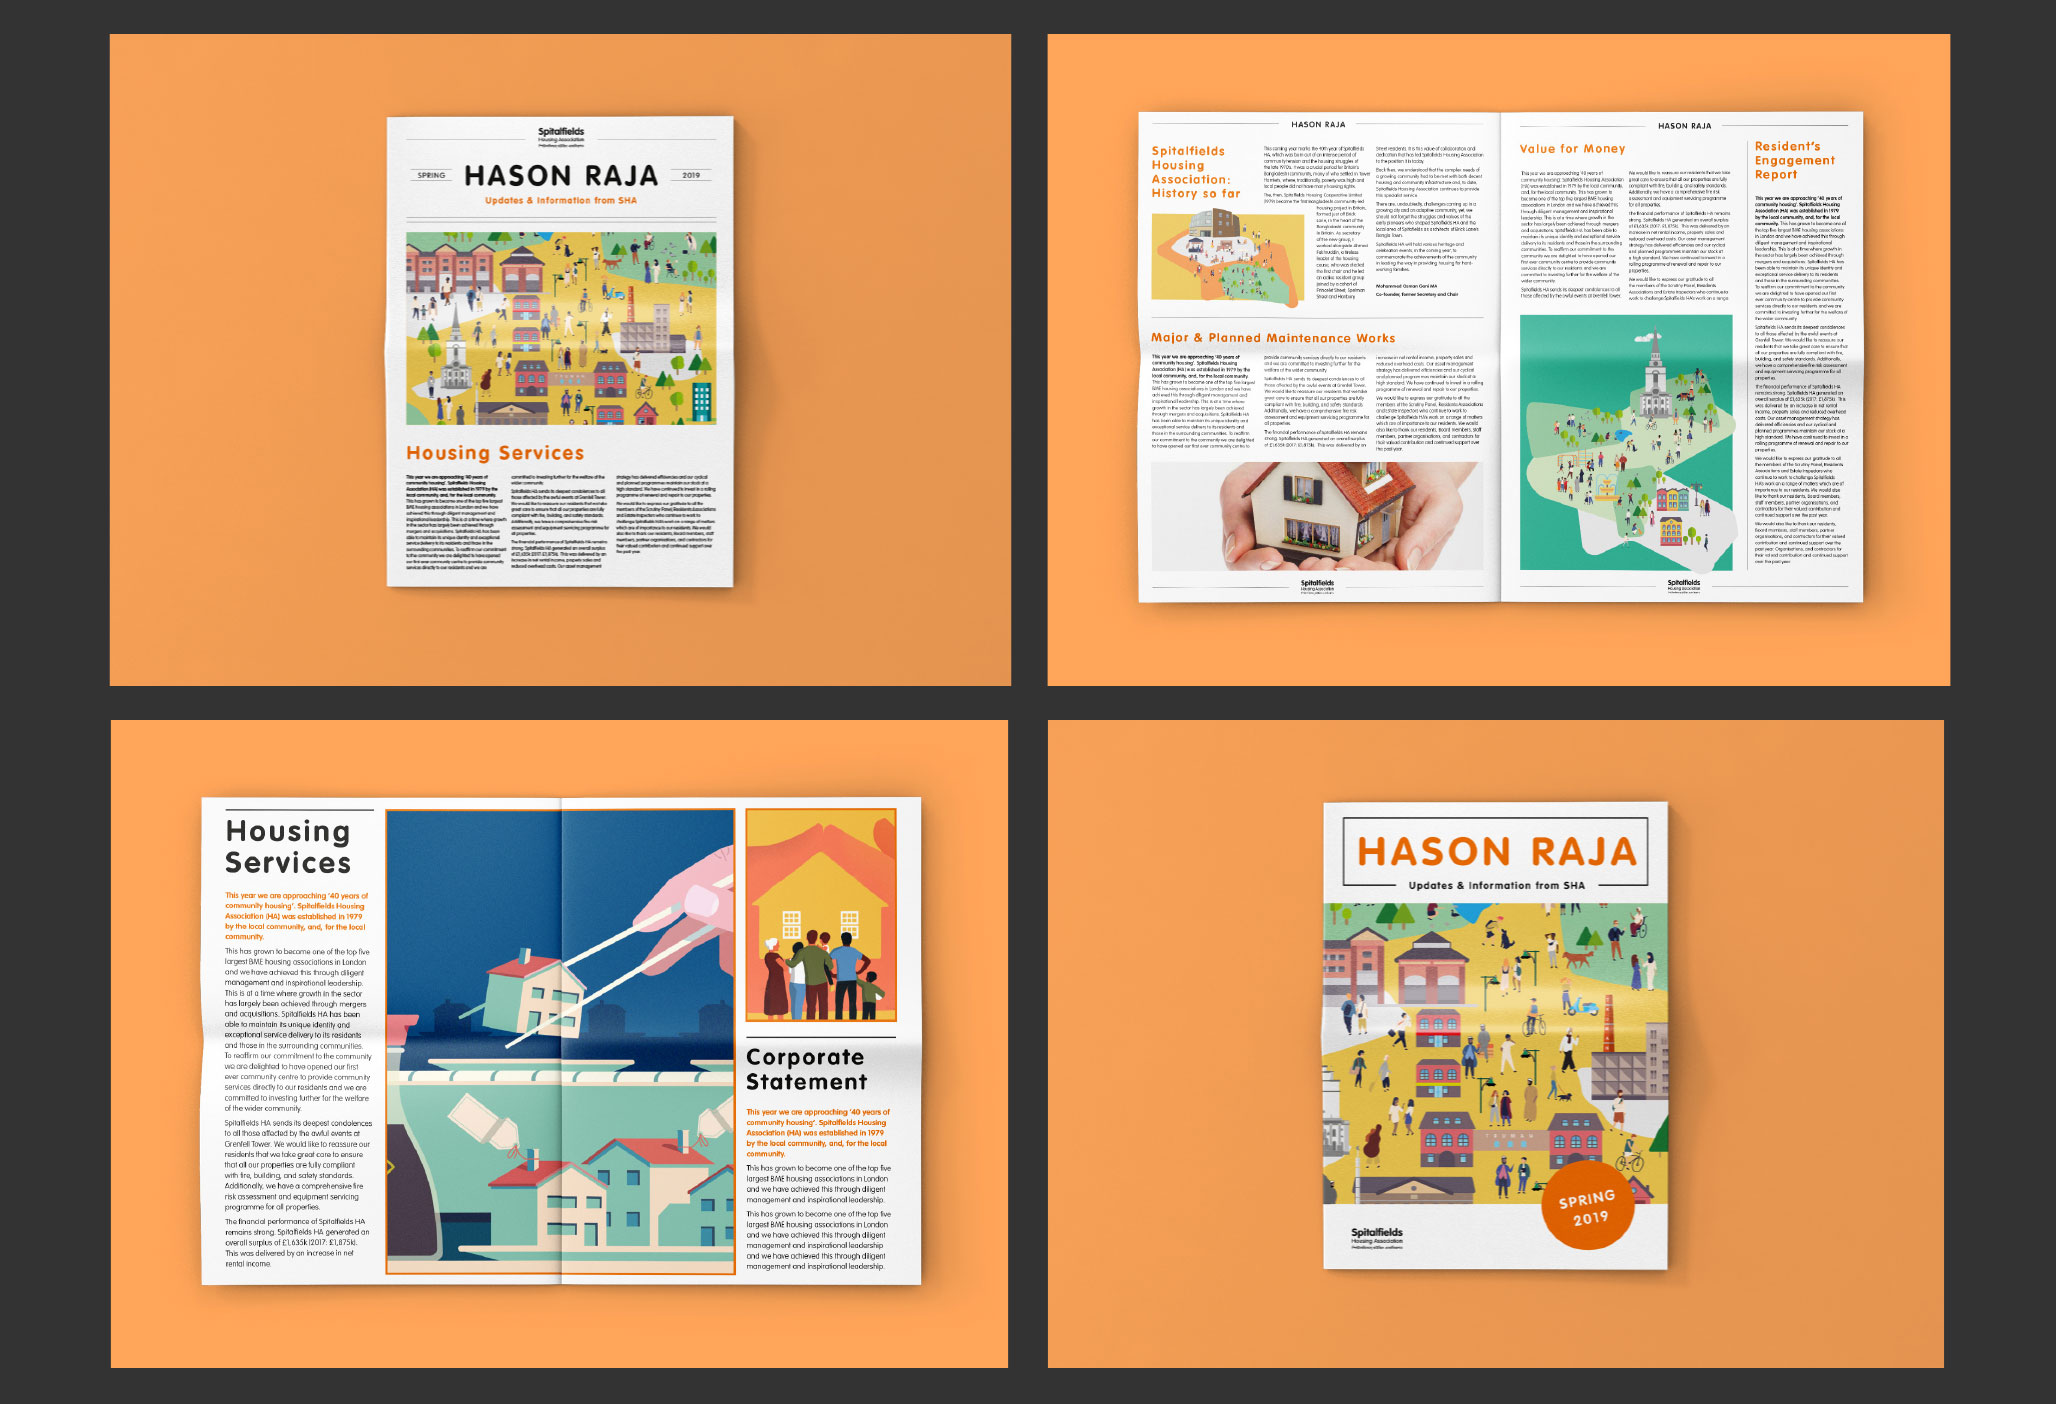 Four pages of the SHA magazine. Two of the pages. showcase the covers and the other two showcase spreads. with imagery and text